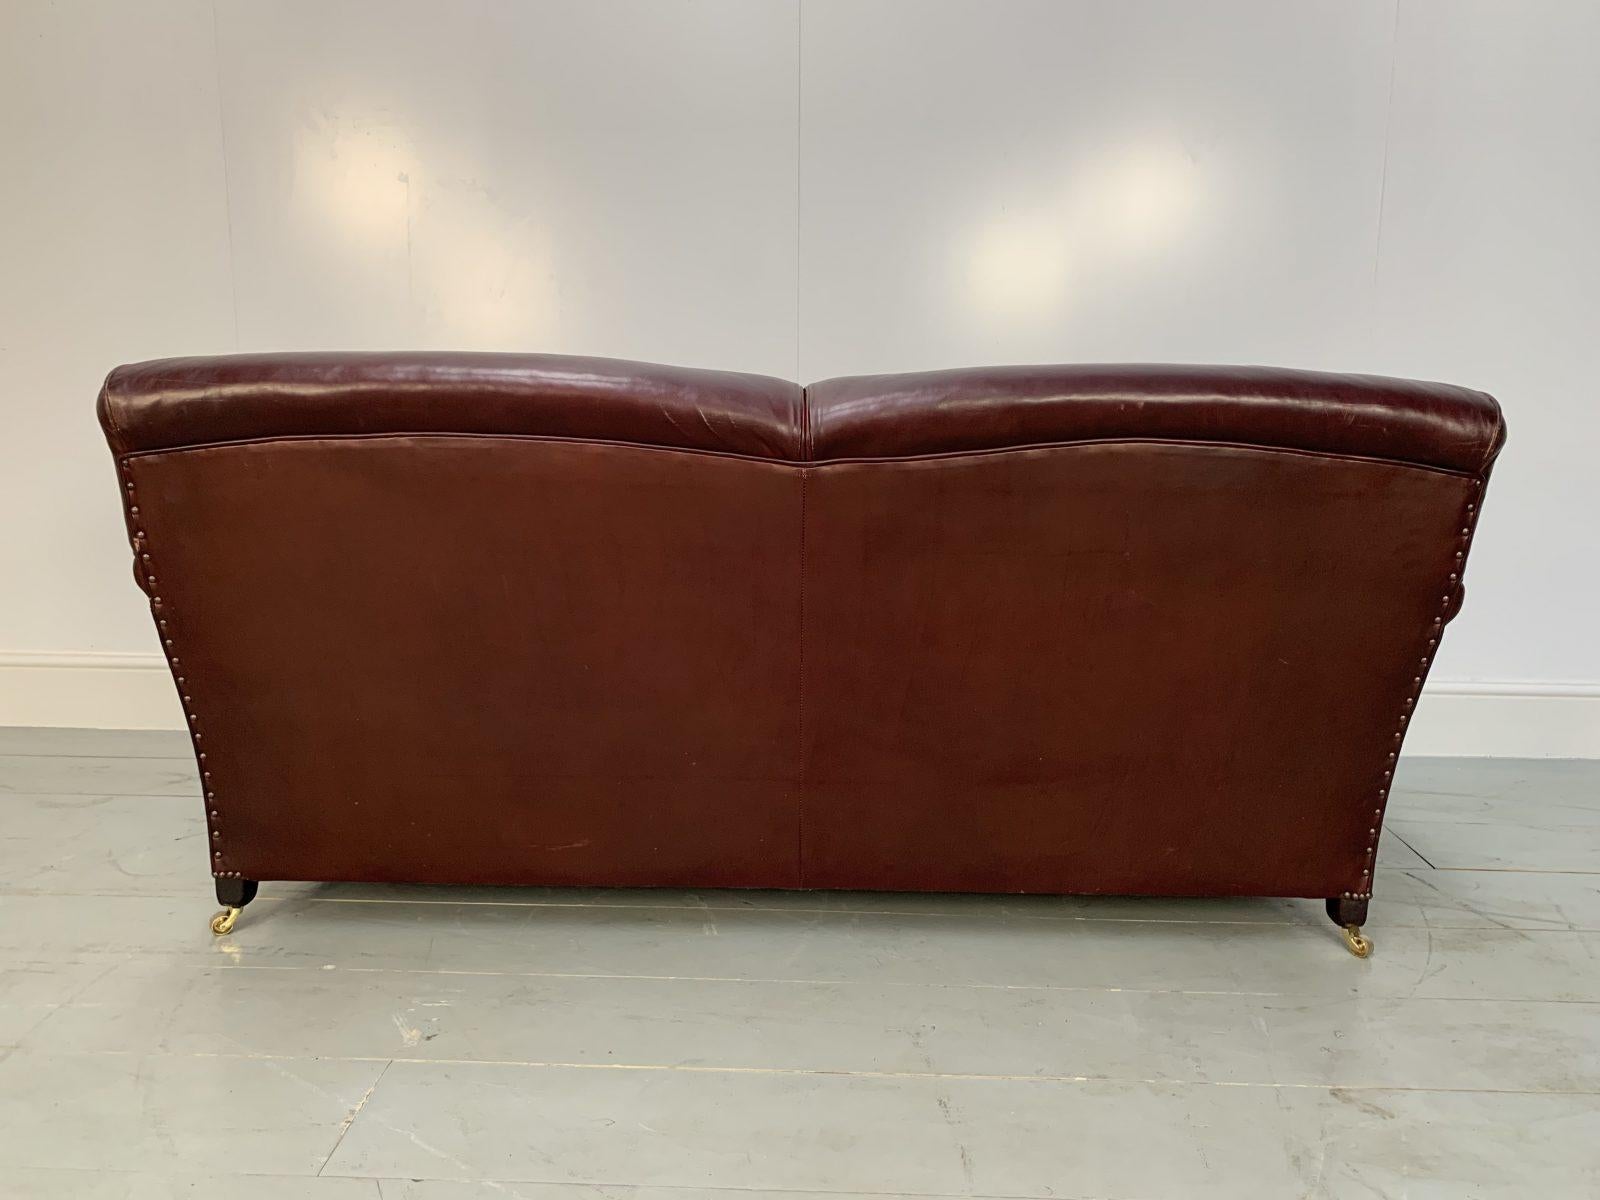 George Smith Leather Sofa – Signature “Standard-Arm” – Large 2.5-Seat Sofa in Ox For Sale 1